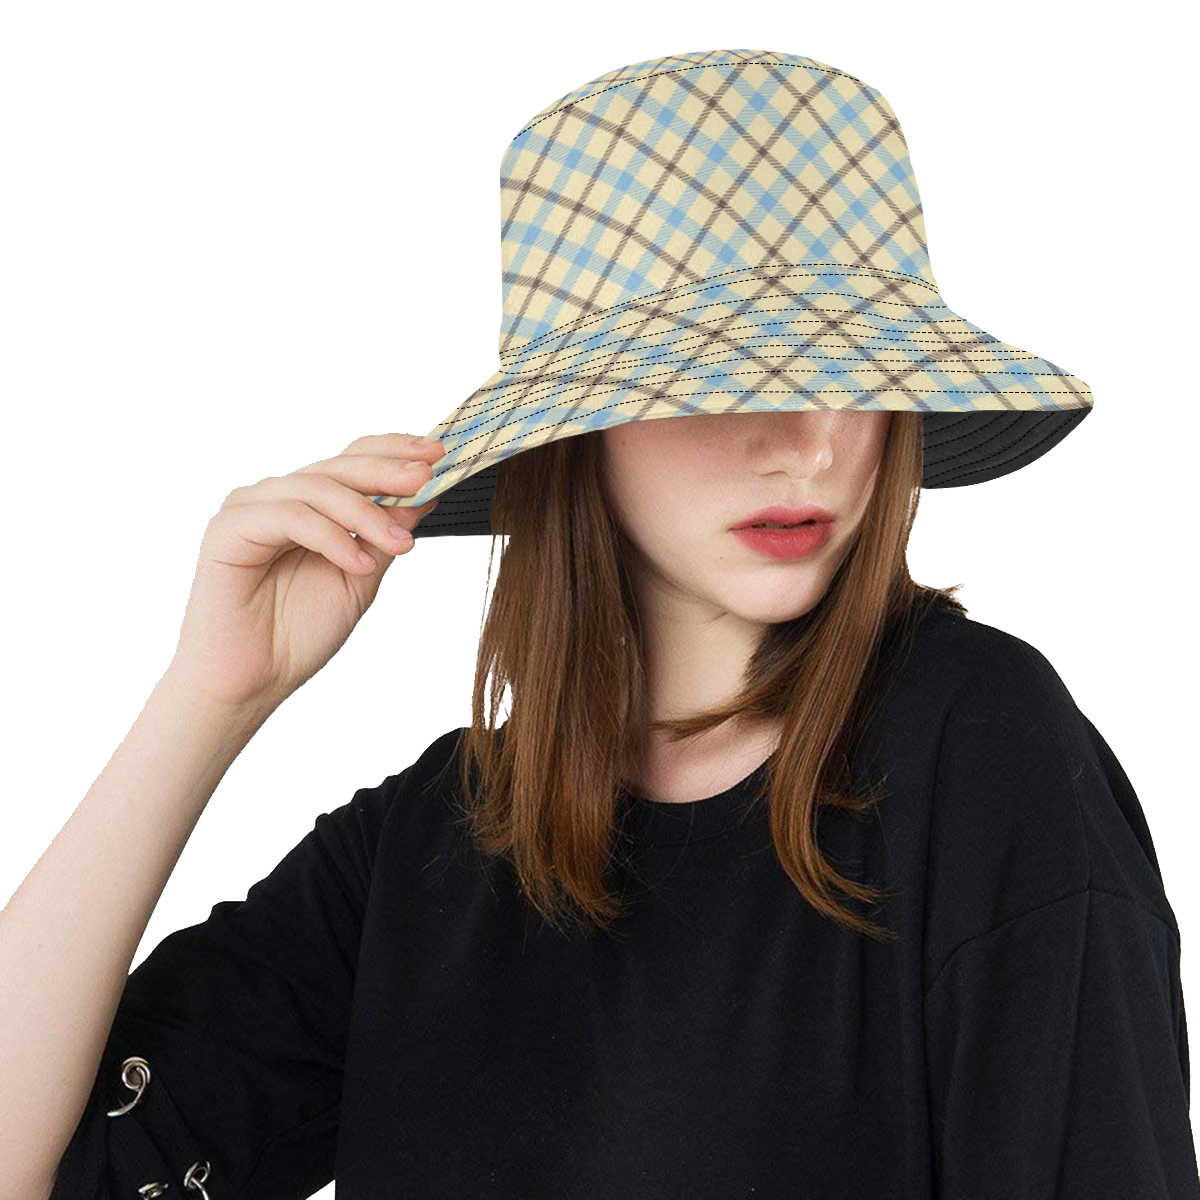 Plaid 2 plain tartan in cream, brown and blue All Over Print Bucket Hat